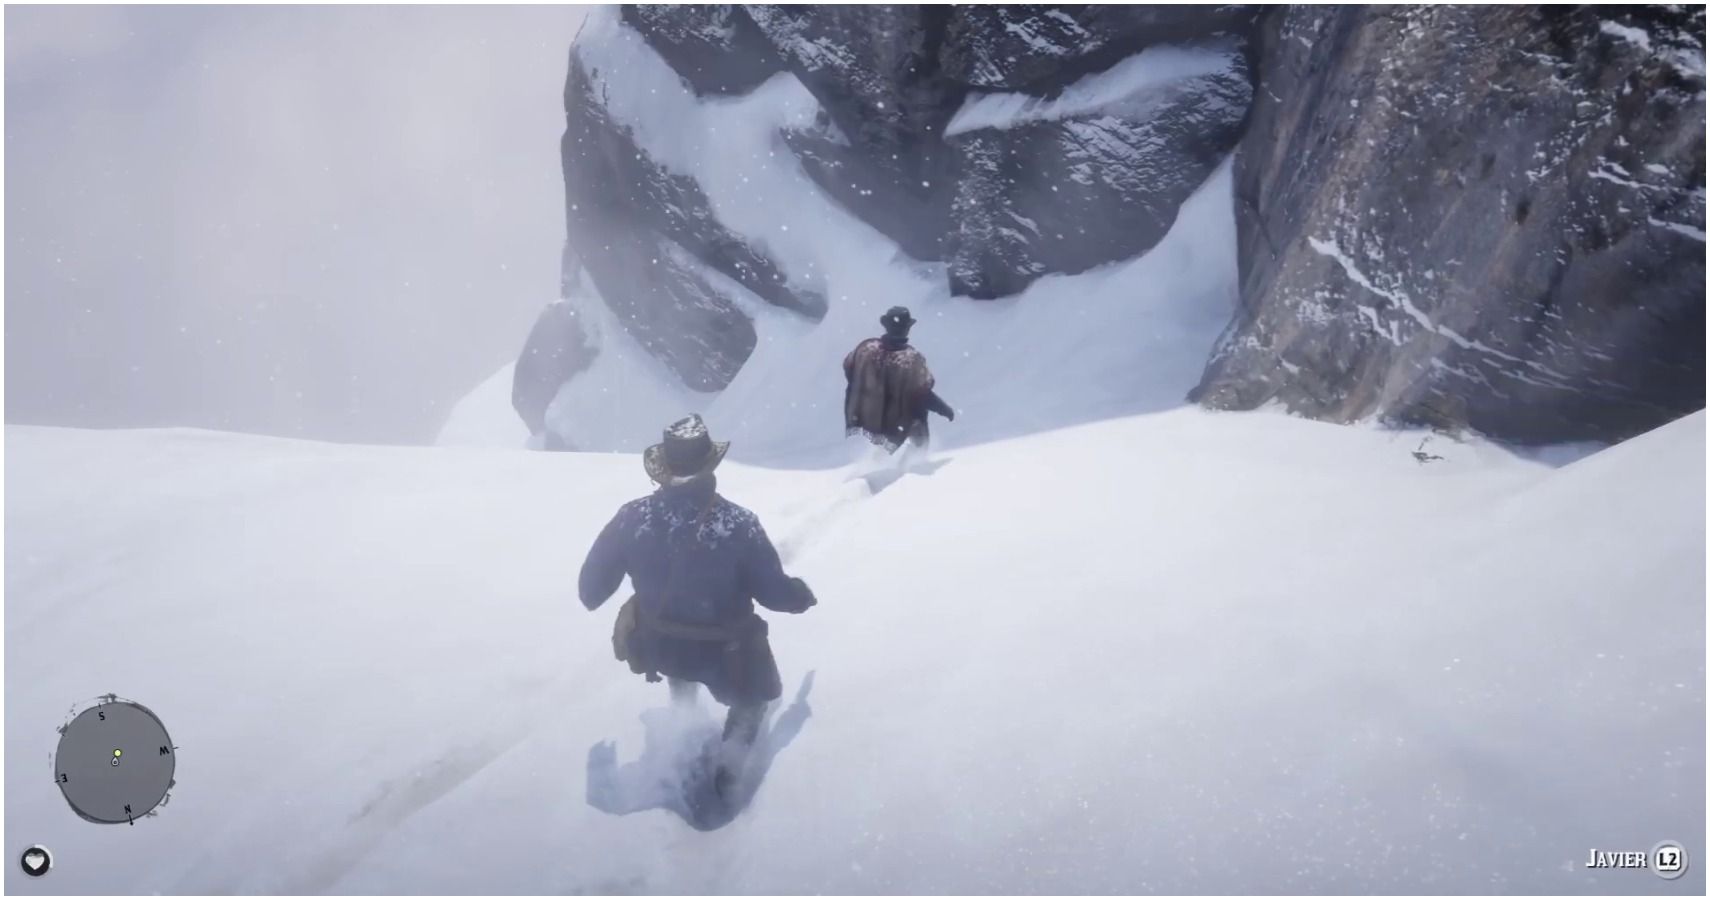 New Zealand Ære Objector Red Dead Redemption 2 Hypotermod Adds A New Layer Of Survival To The Game